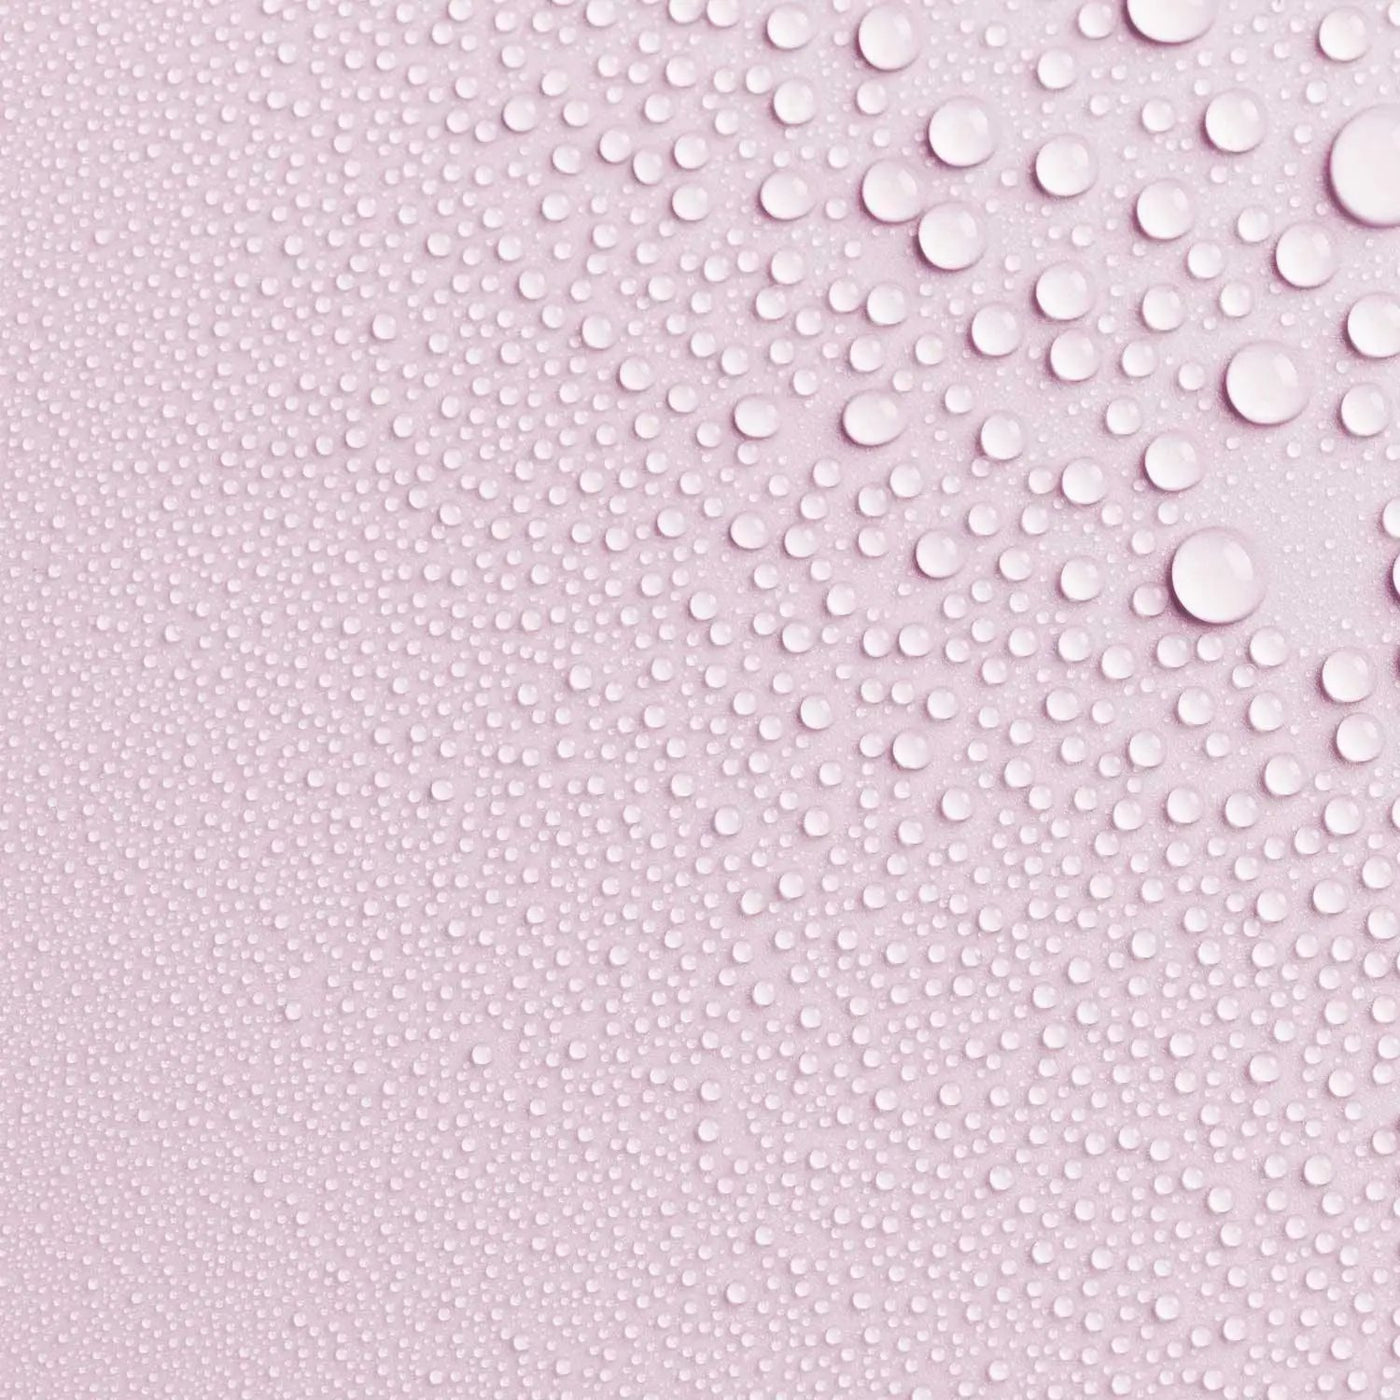 Close-up photo of AntiBeauty Fragile Soothing Toning Mist texture, with fine mist droplets on a pastel pink background.